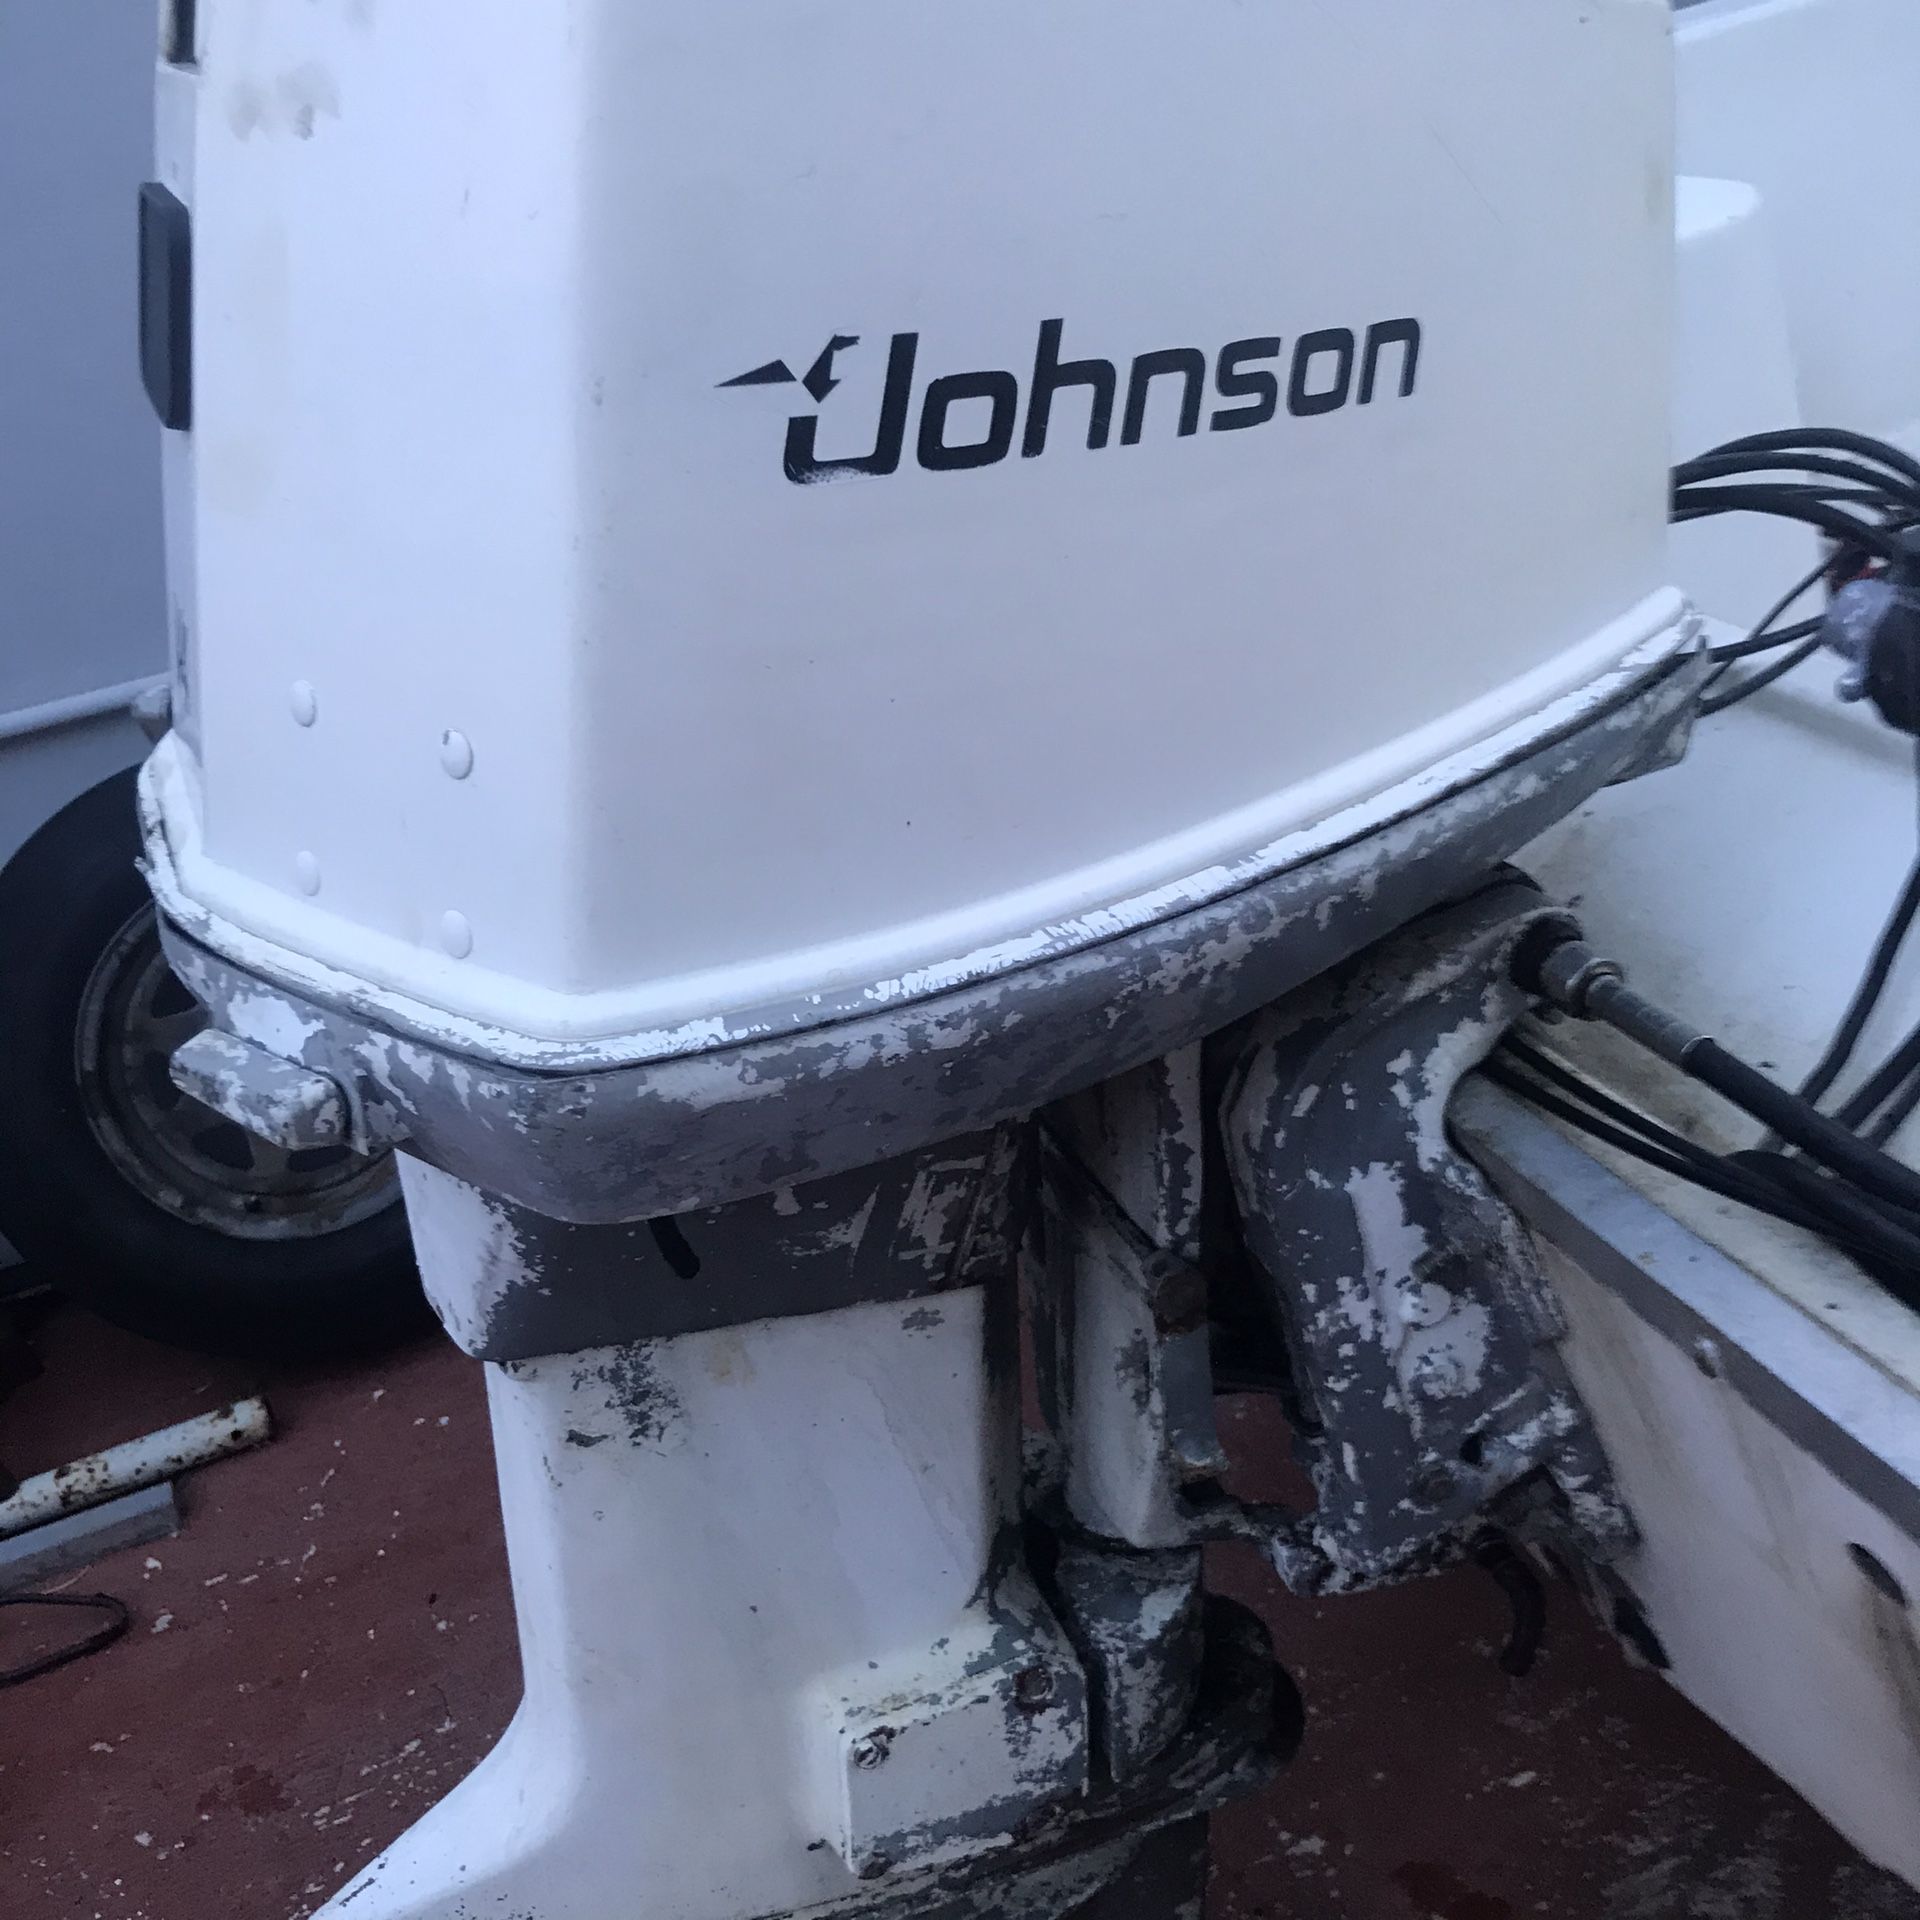 Selling. 1989. 115. Johnson , good tilt and trim , compression on 3 cyl. 90 lbs. 1. 65 lbs. good rebuilt or parts. Fresh water motor. 475.0